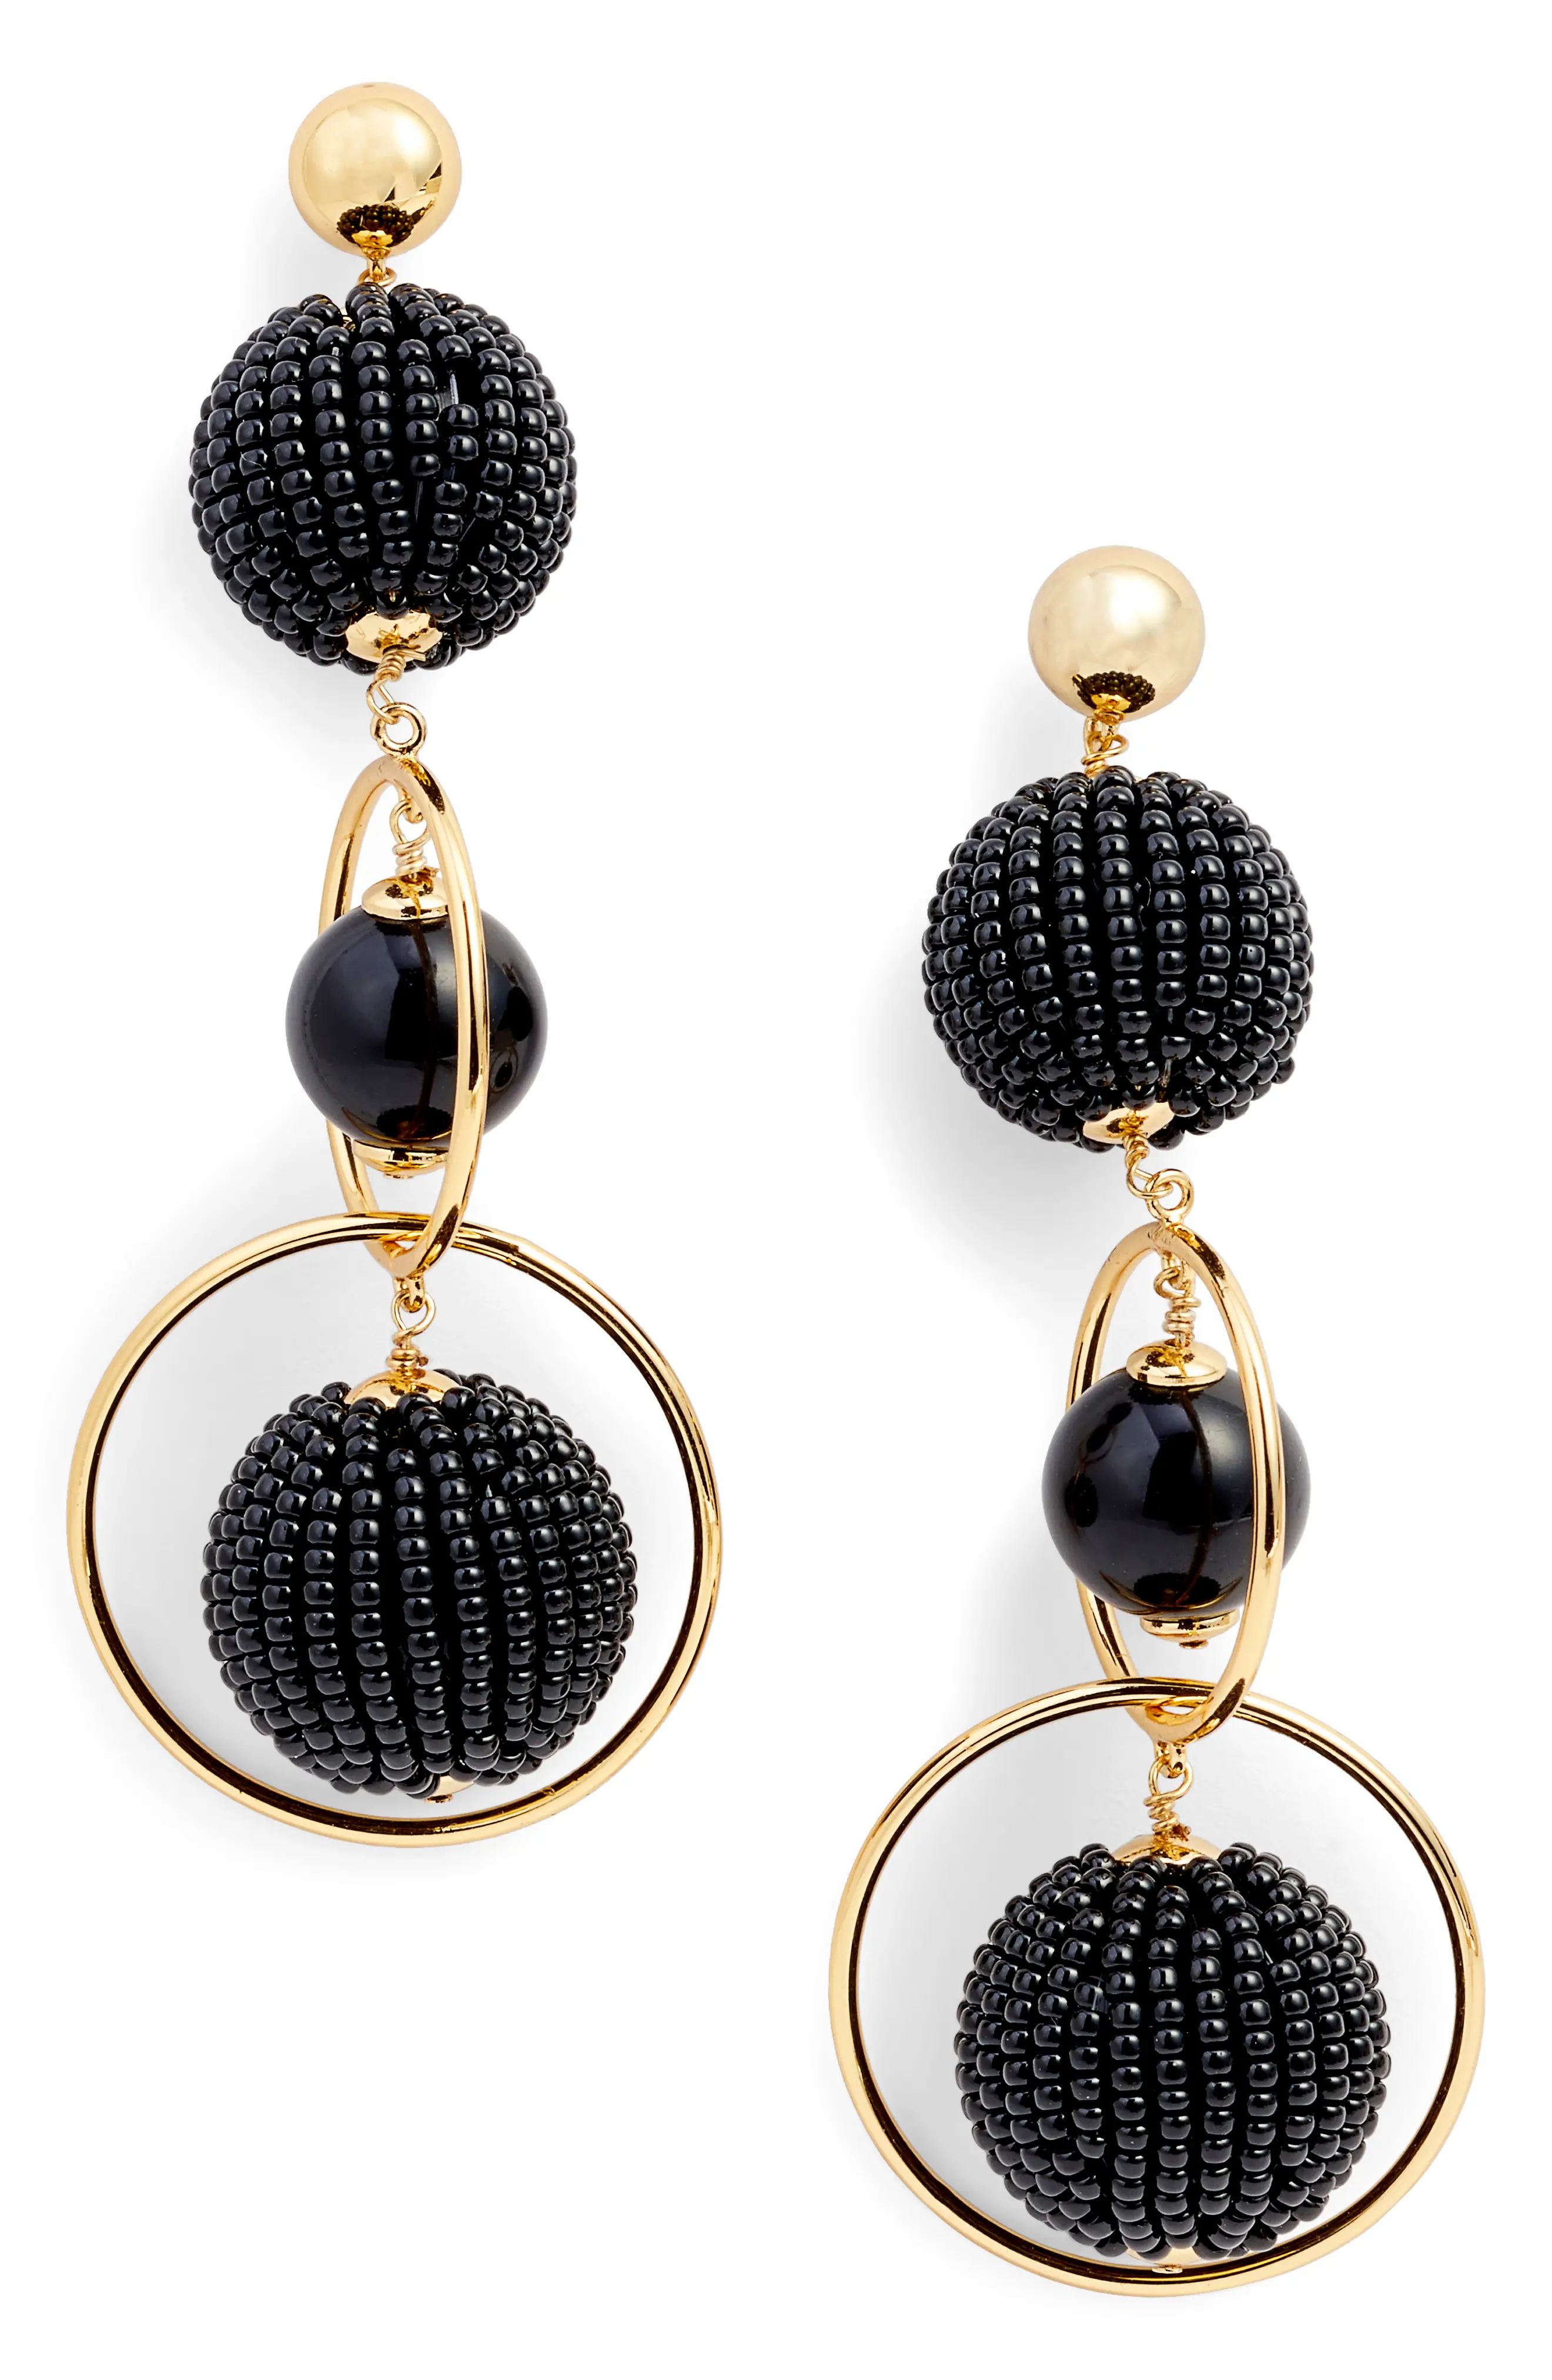 kate spade new york beads and baubles drop earrings | Nordstrom